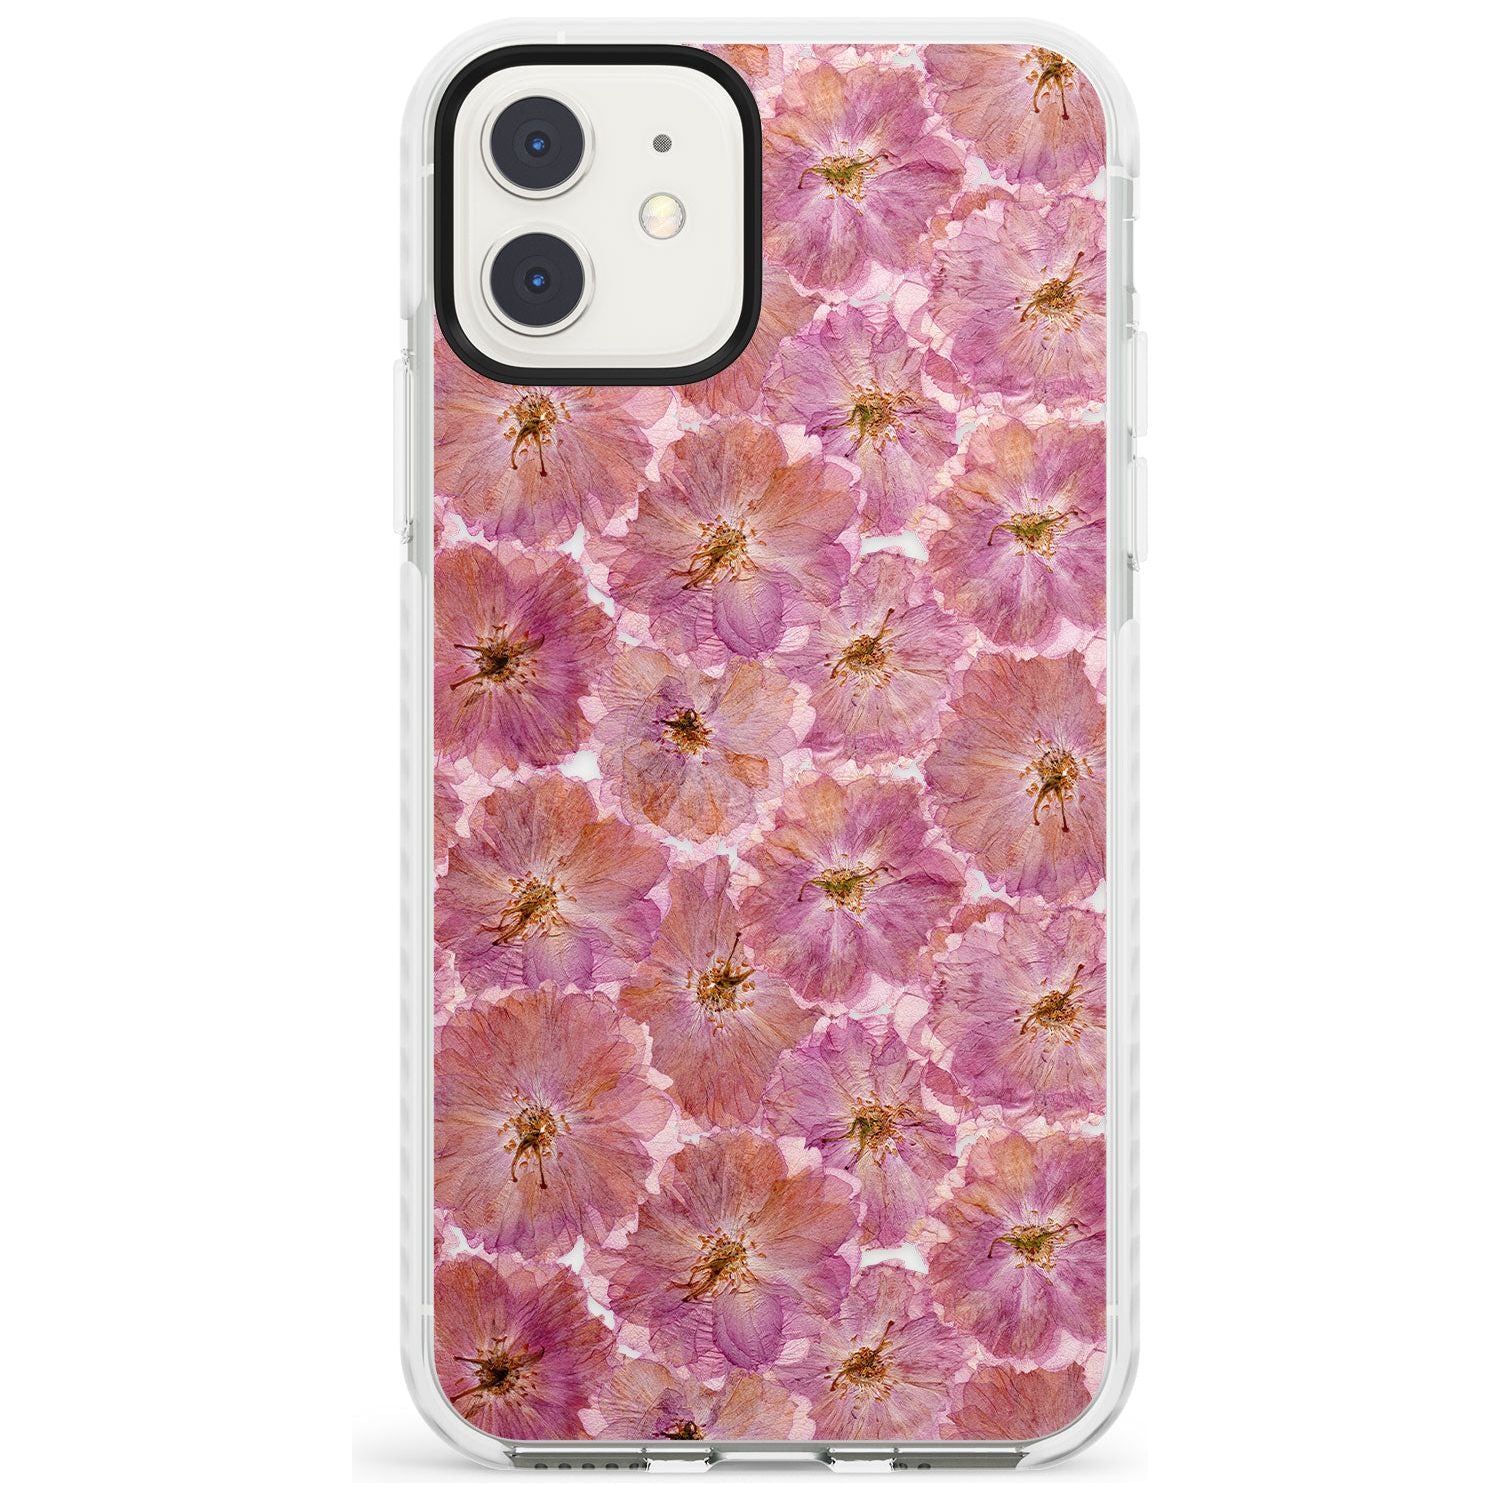 Large Pink Flowers Transparent Design Impact Phone Case for iPhone 11